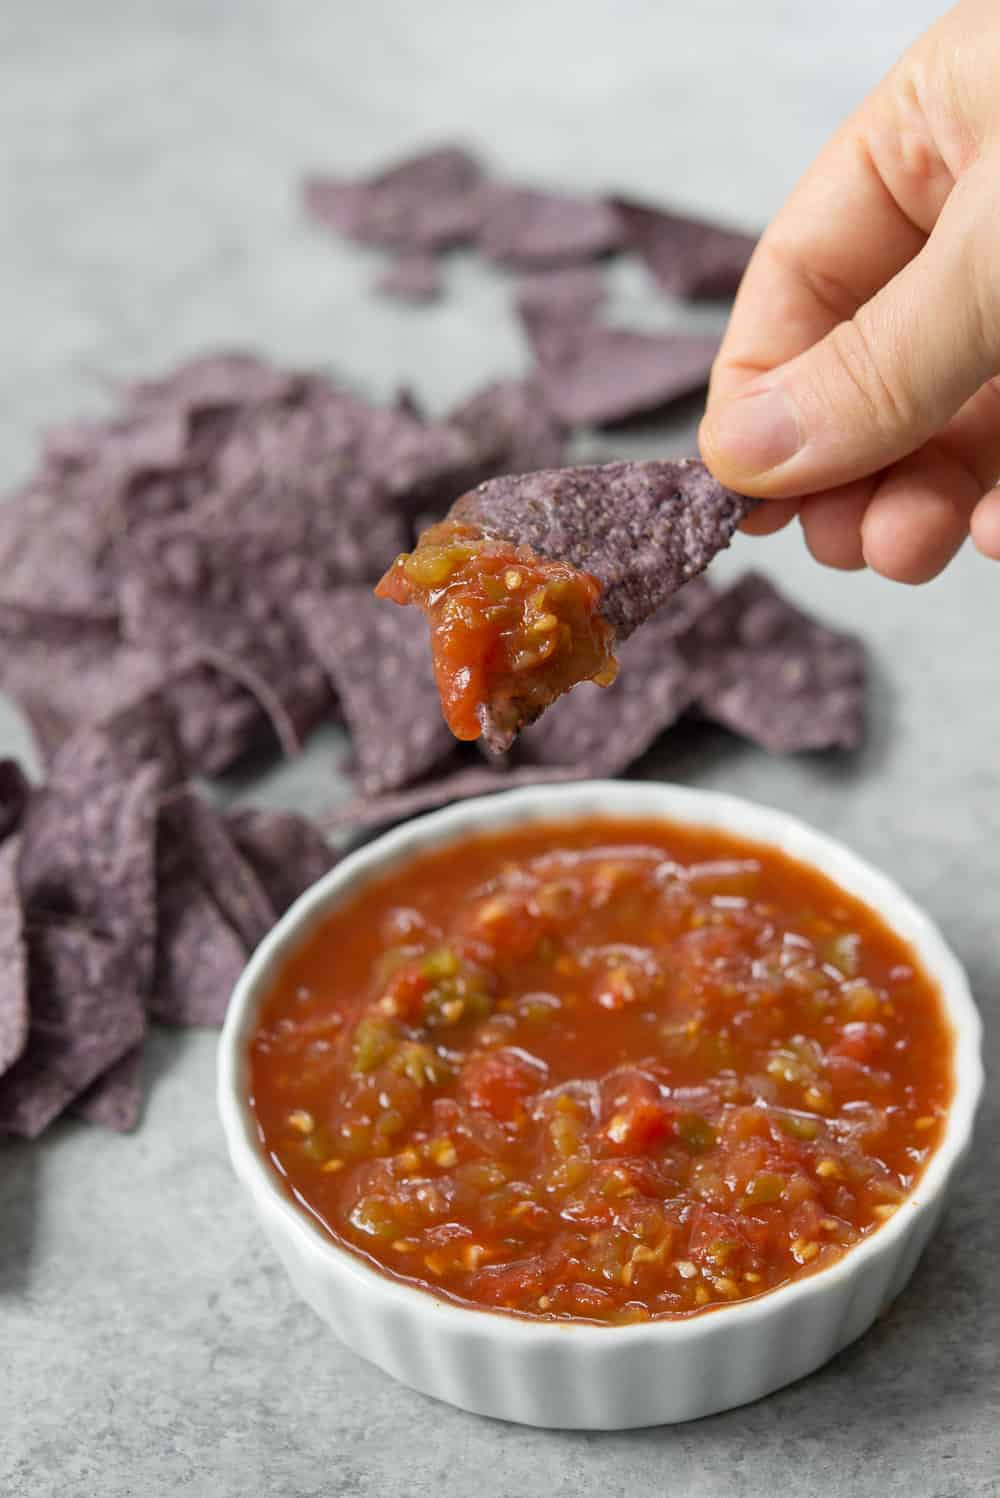 Best Salsa Recipe For Canning
 The Best Homemade Salsa for Canning Delish Knowledge